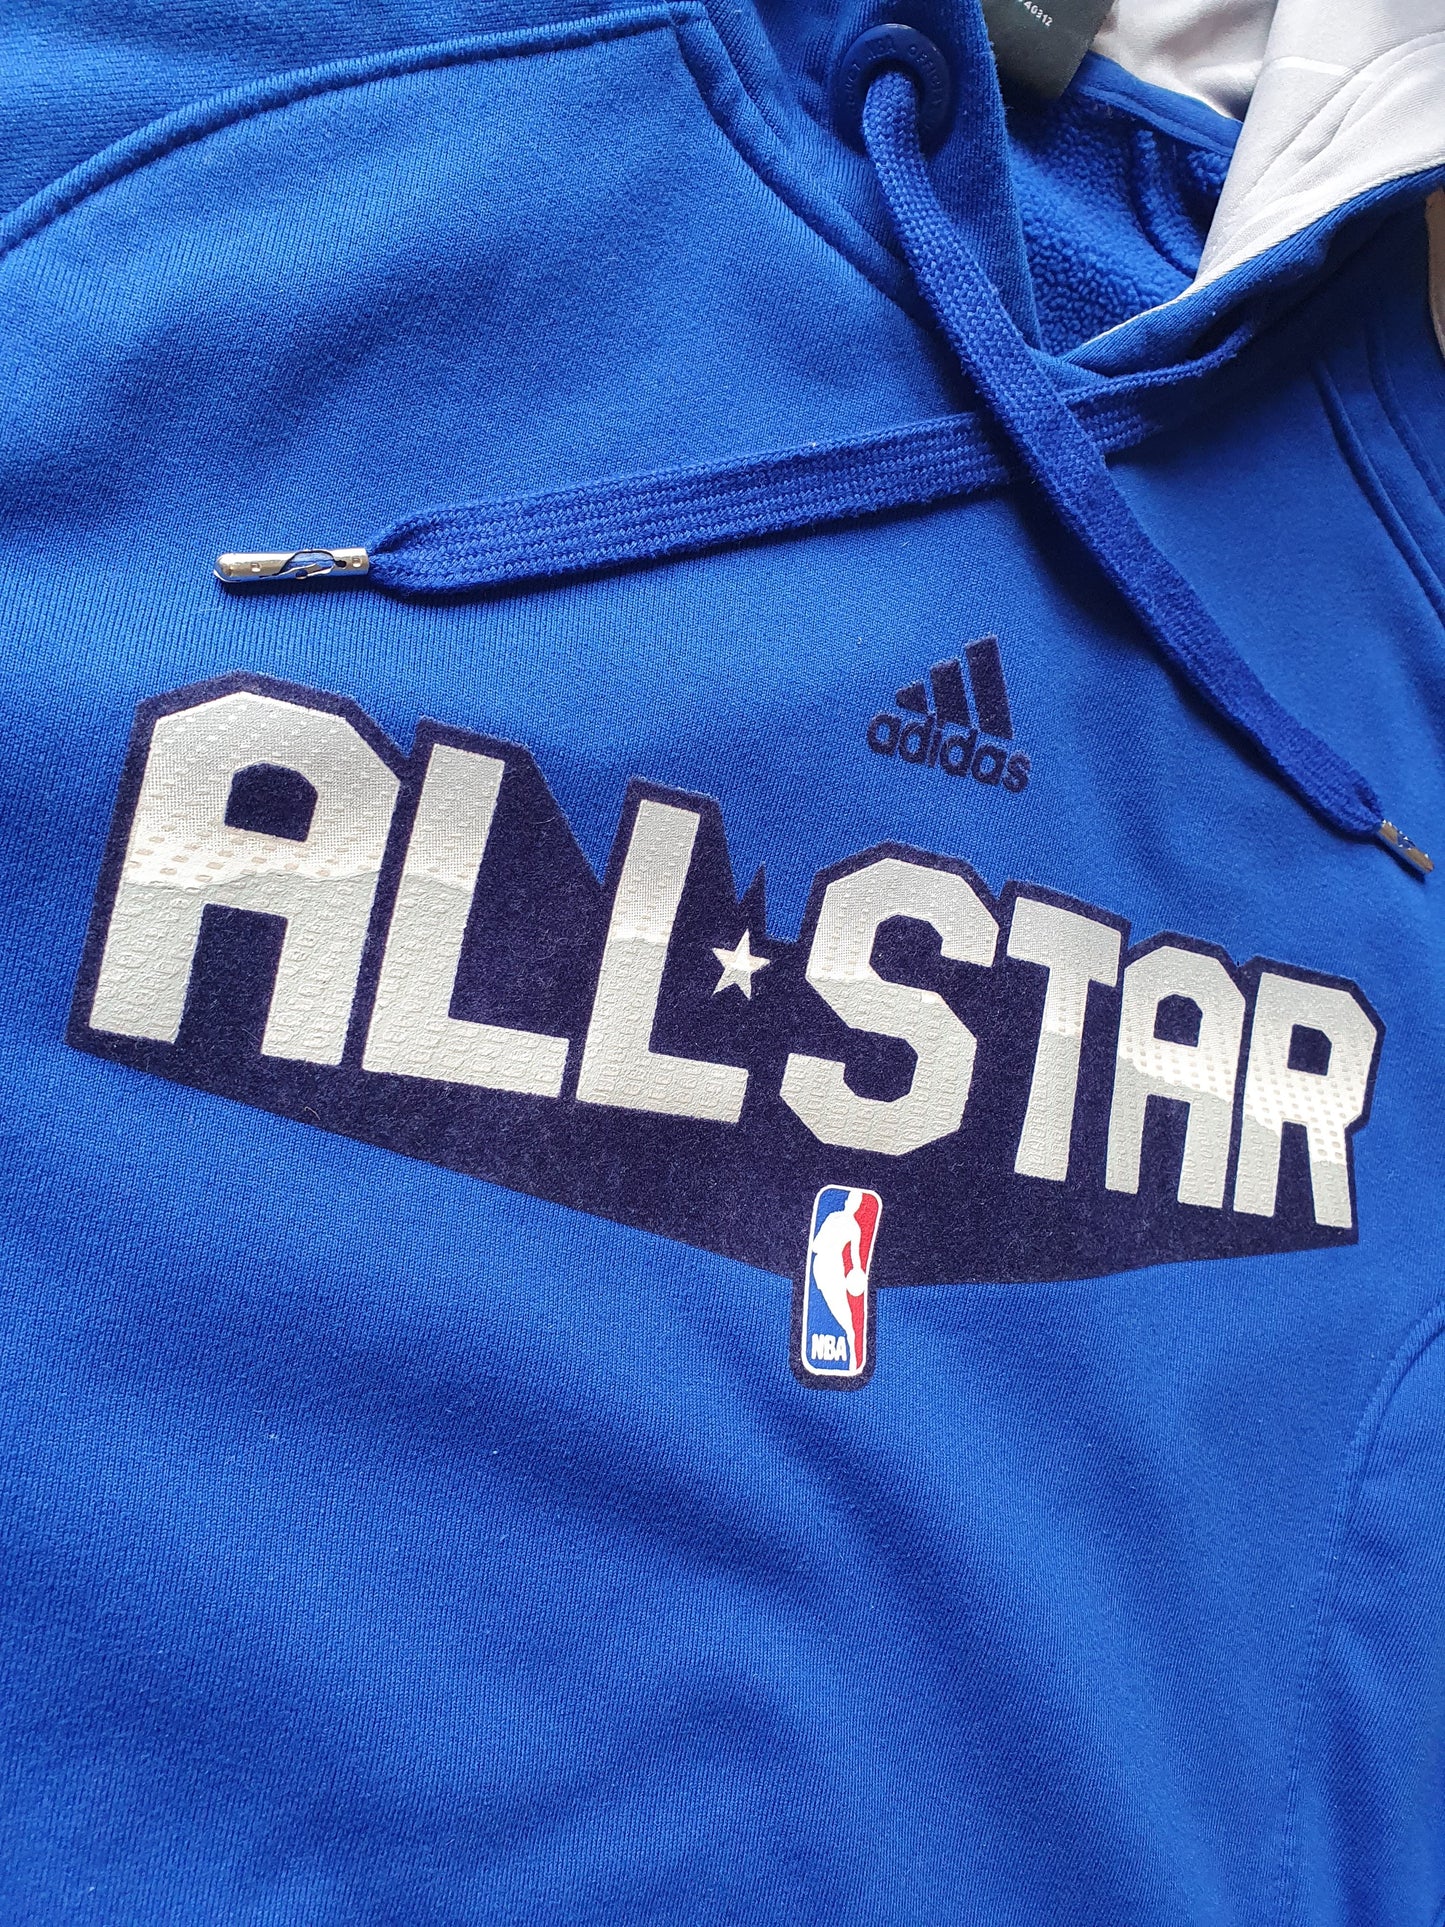 NBA All Star 2011 Hoodie Sweater Size Small